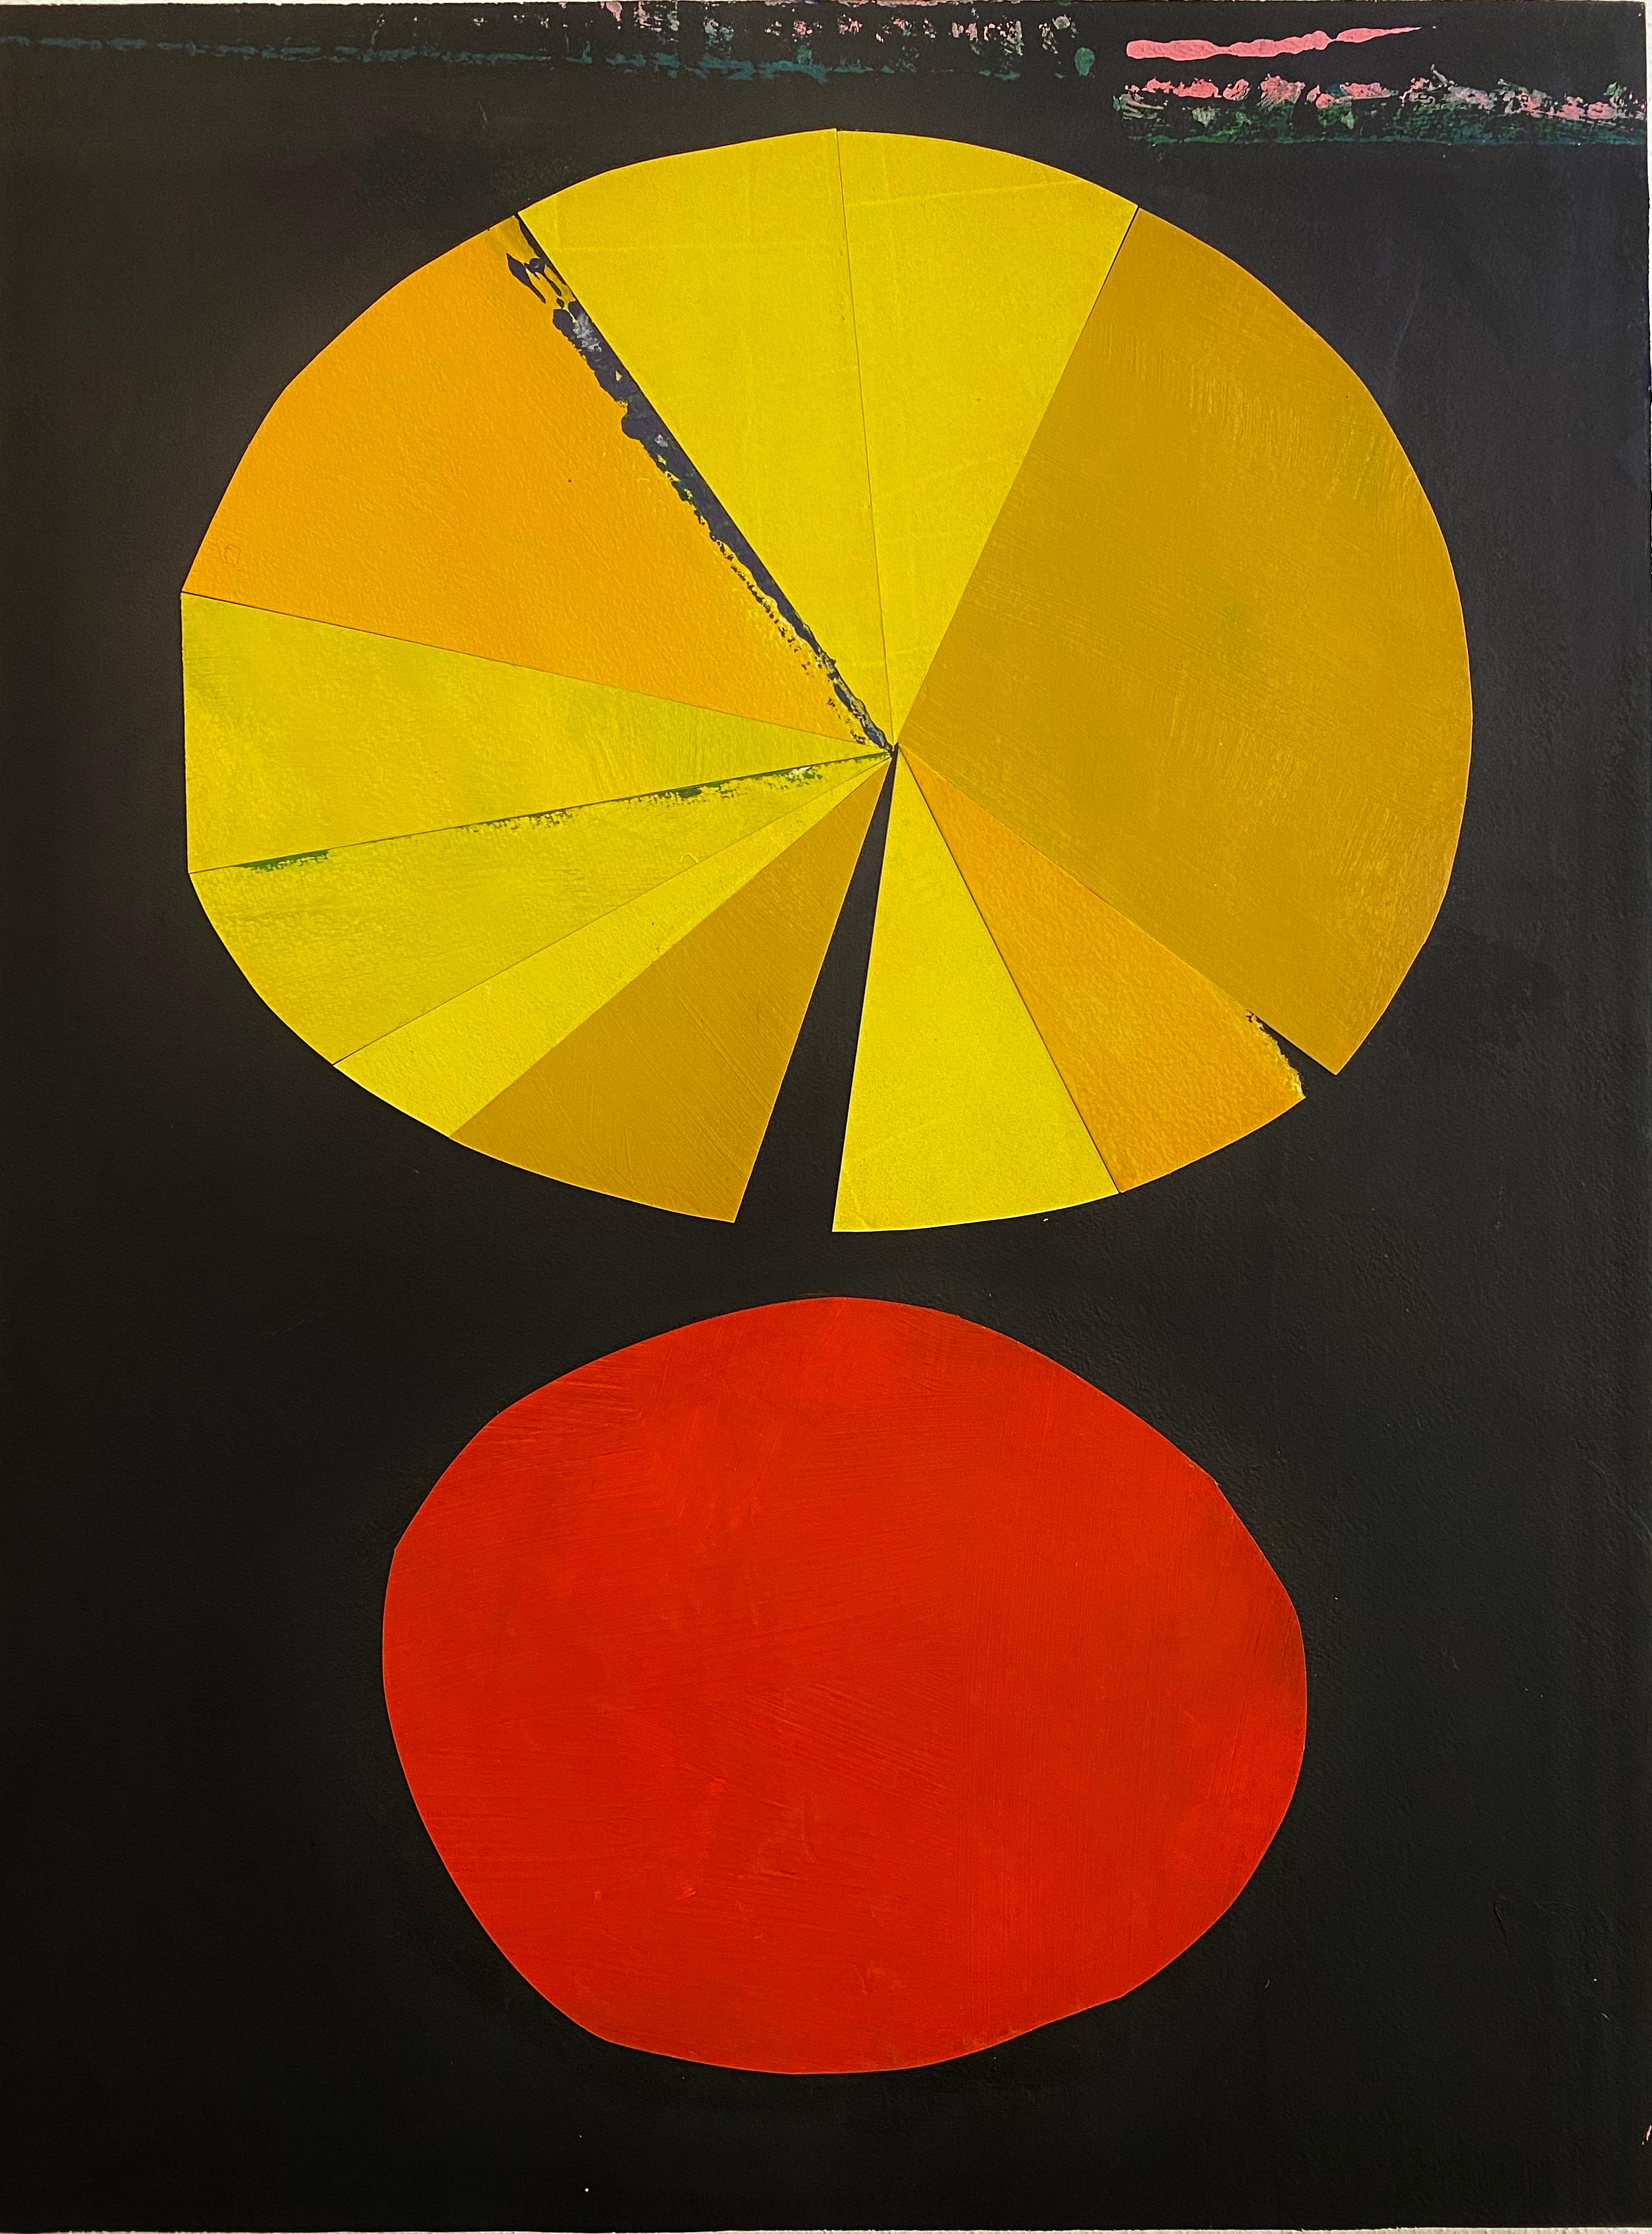 Dandelion
18.0 x 24.0 x 0.75, 7.5 lbs
Acrylic, archival paper, and wood panel 
Hand signed by artist

Artist's Commentary: 
"This modernist abstract piece features bright yellow and orange on a black ground, bringing to mind a dandelion in a burst